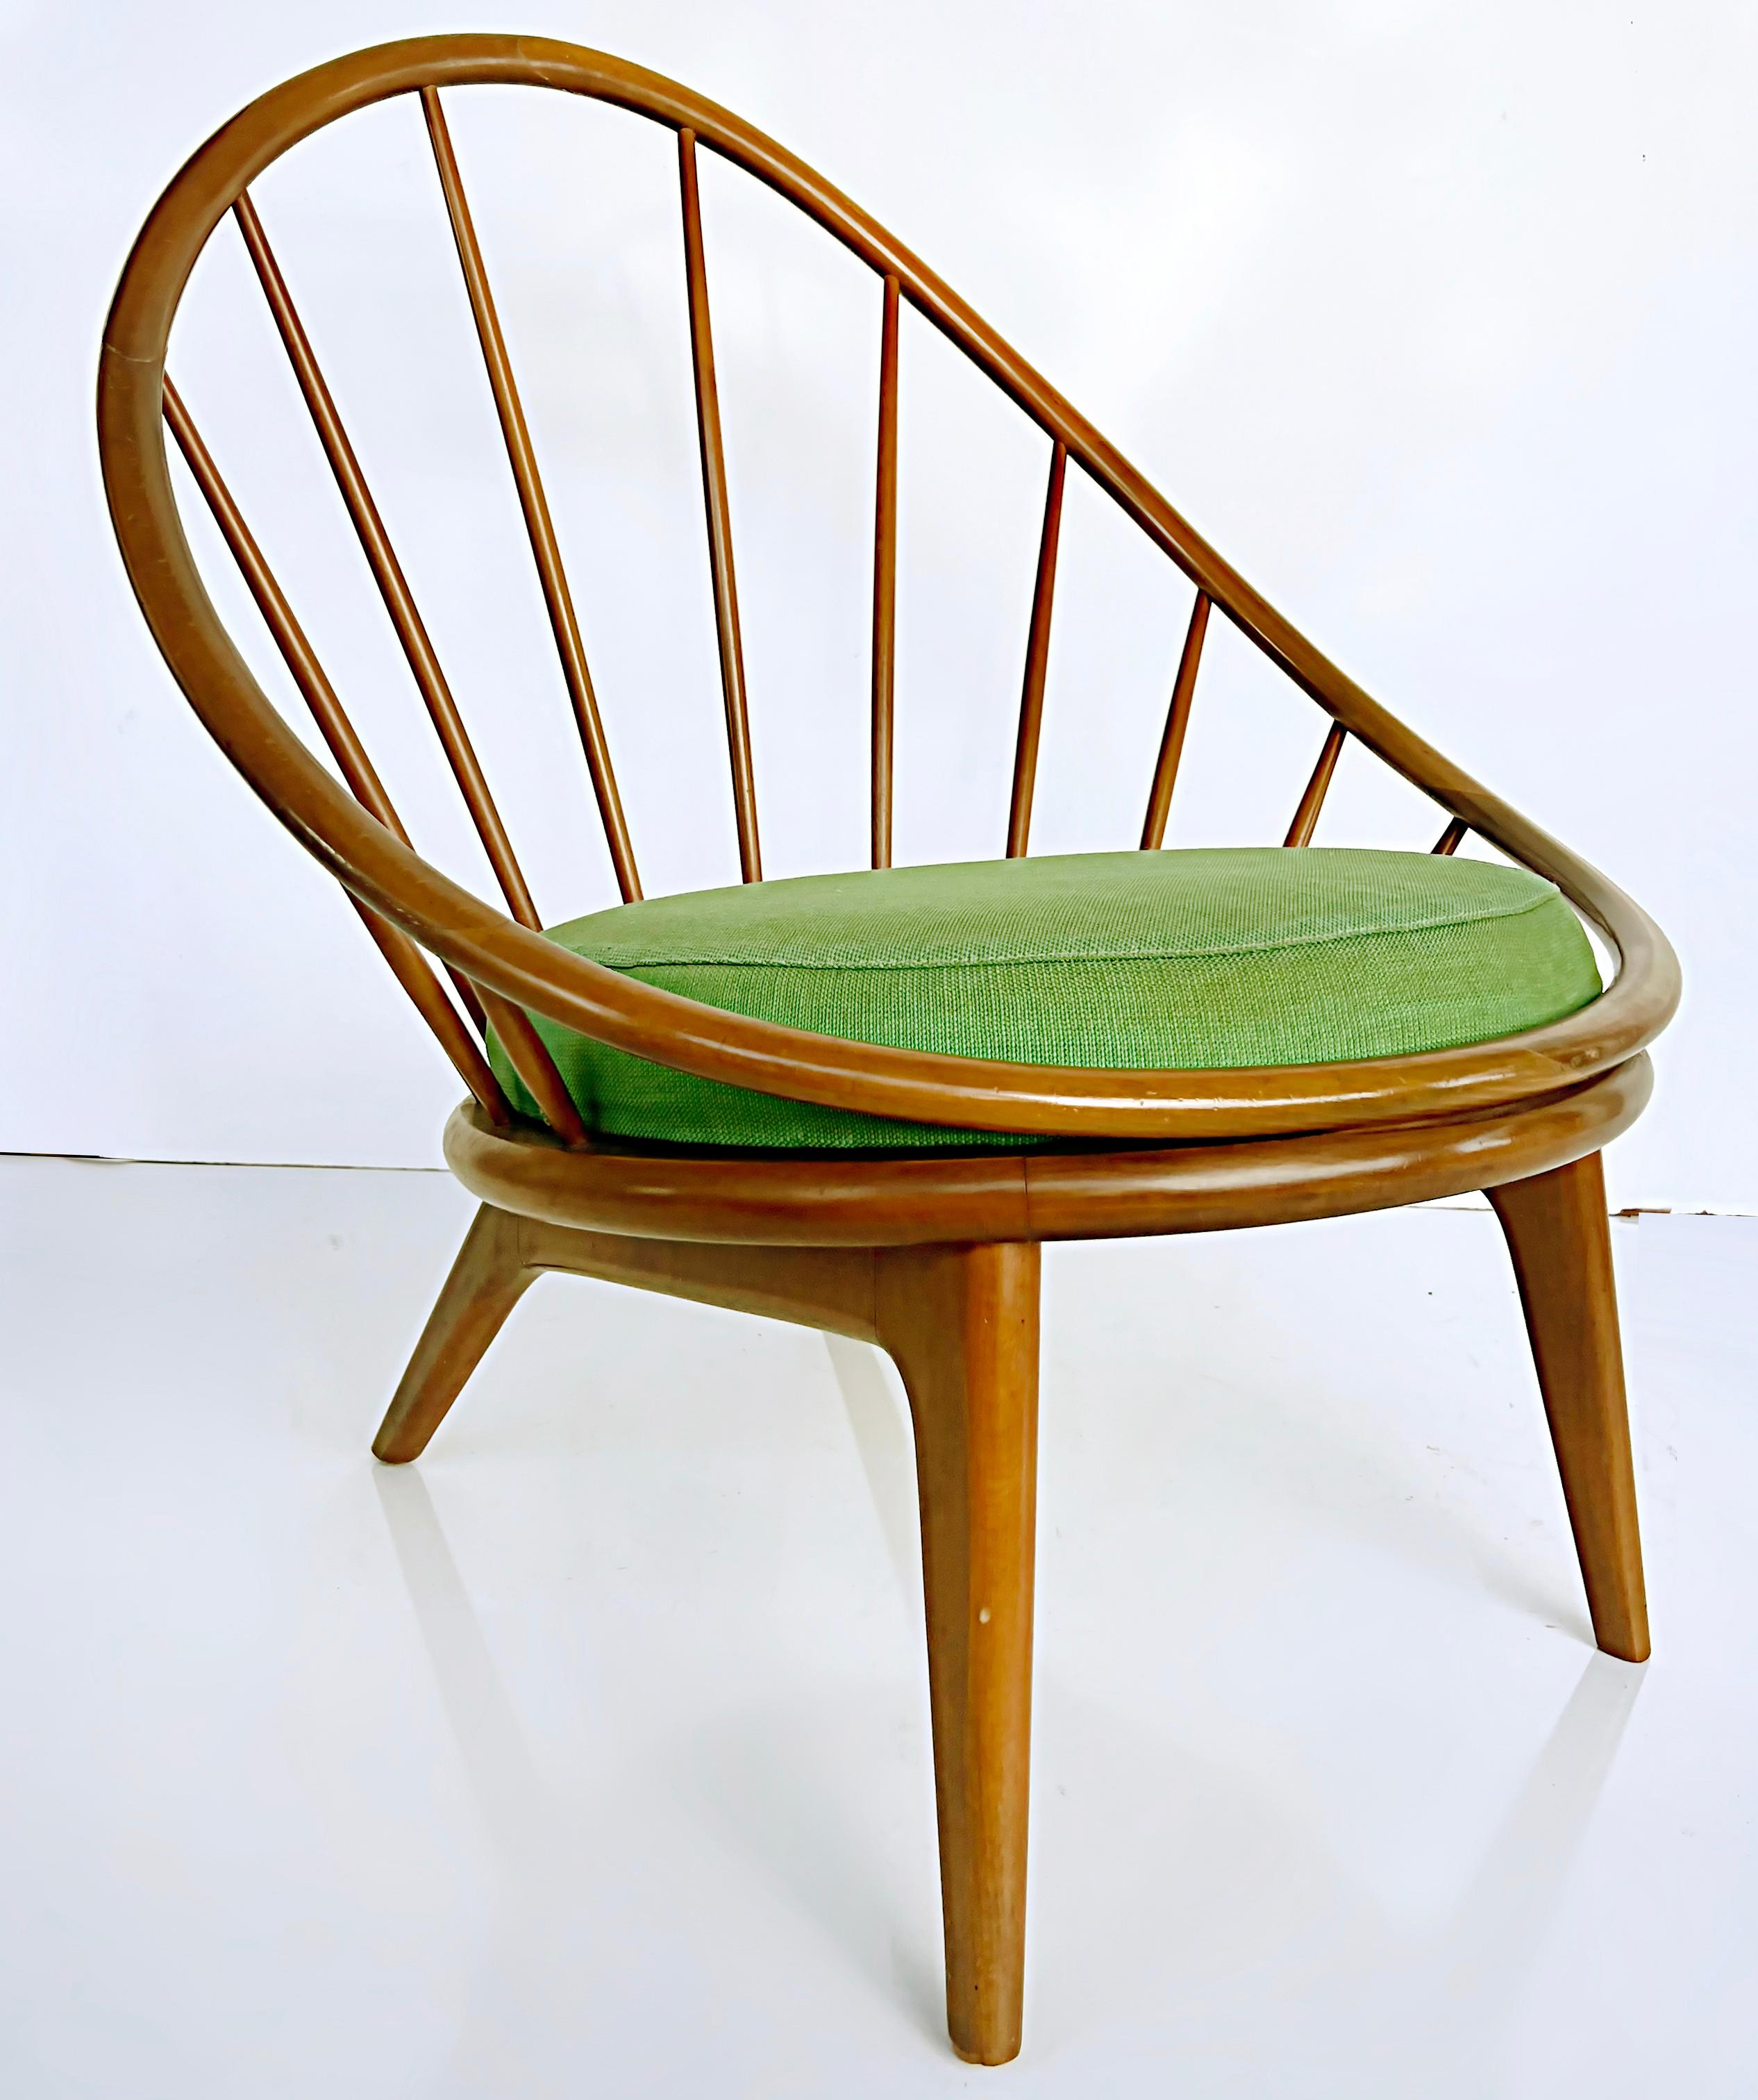 20th Century 1950s Danish Modern Ib Kofod Larsen for Selig Hoop Chair with Seat Cushion For Sale